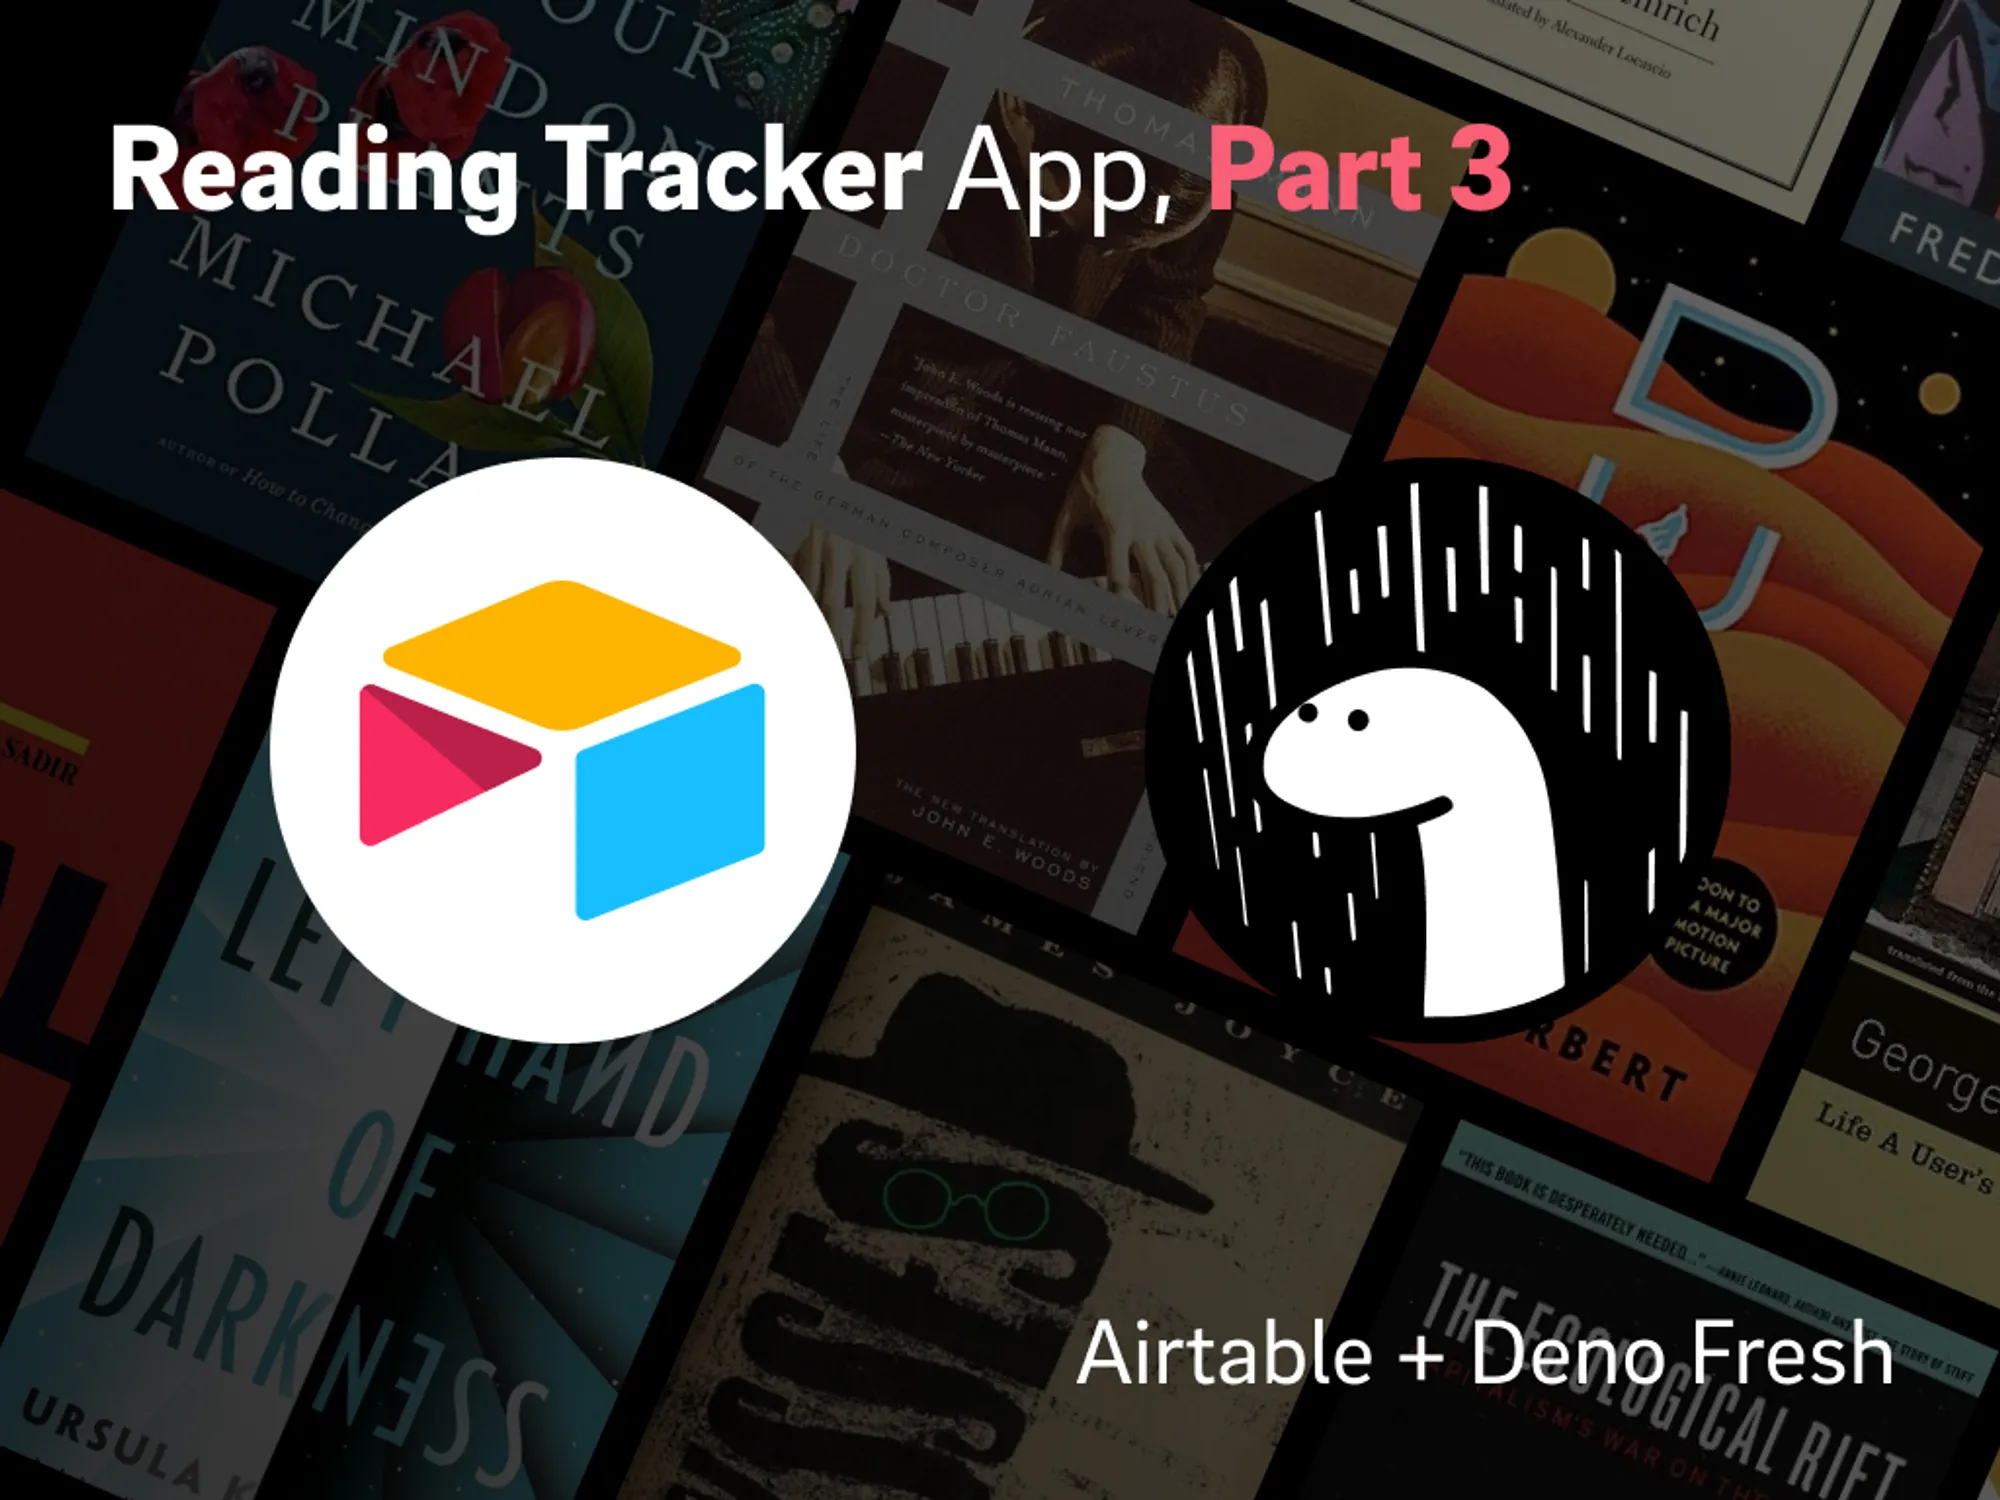 Reading tracker app with Airtable and Deno Fresh, showing the Airtable and Deno logos.